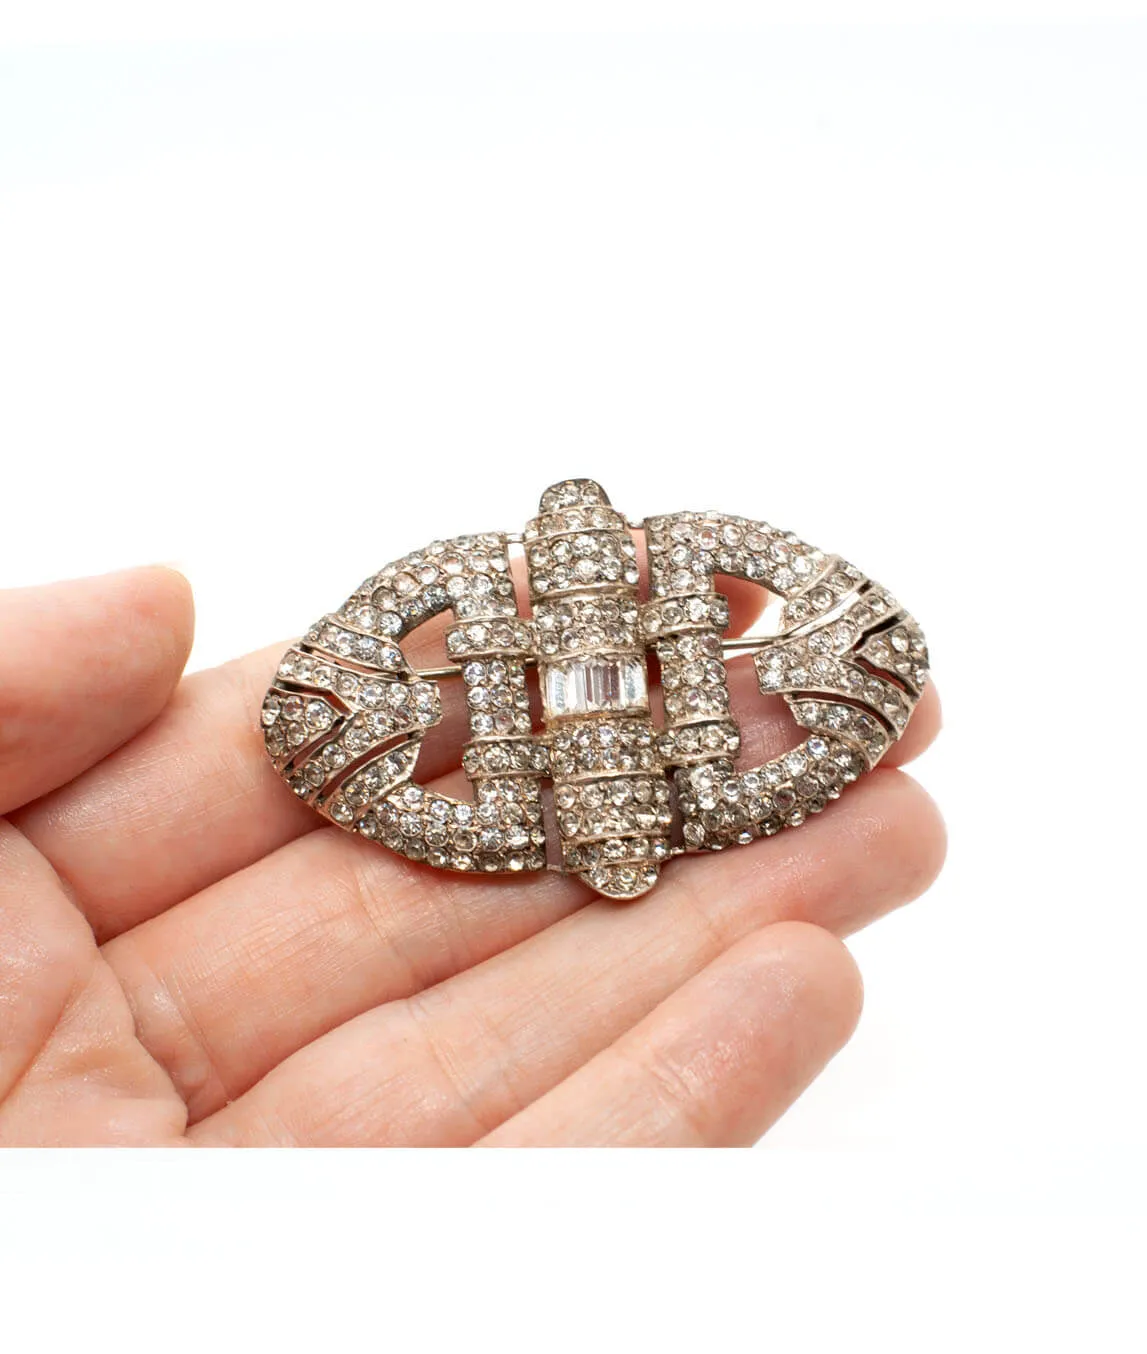 Art Deco brooch in the hand